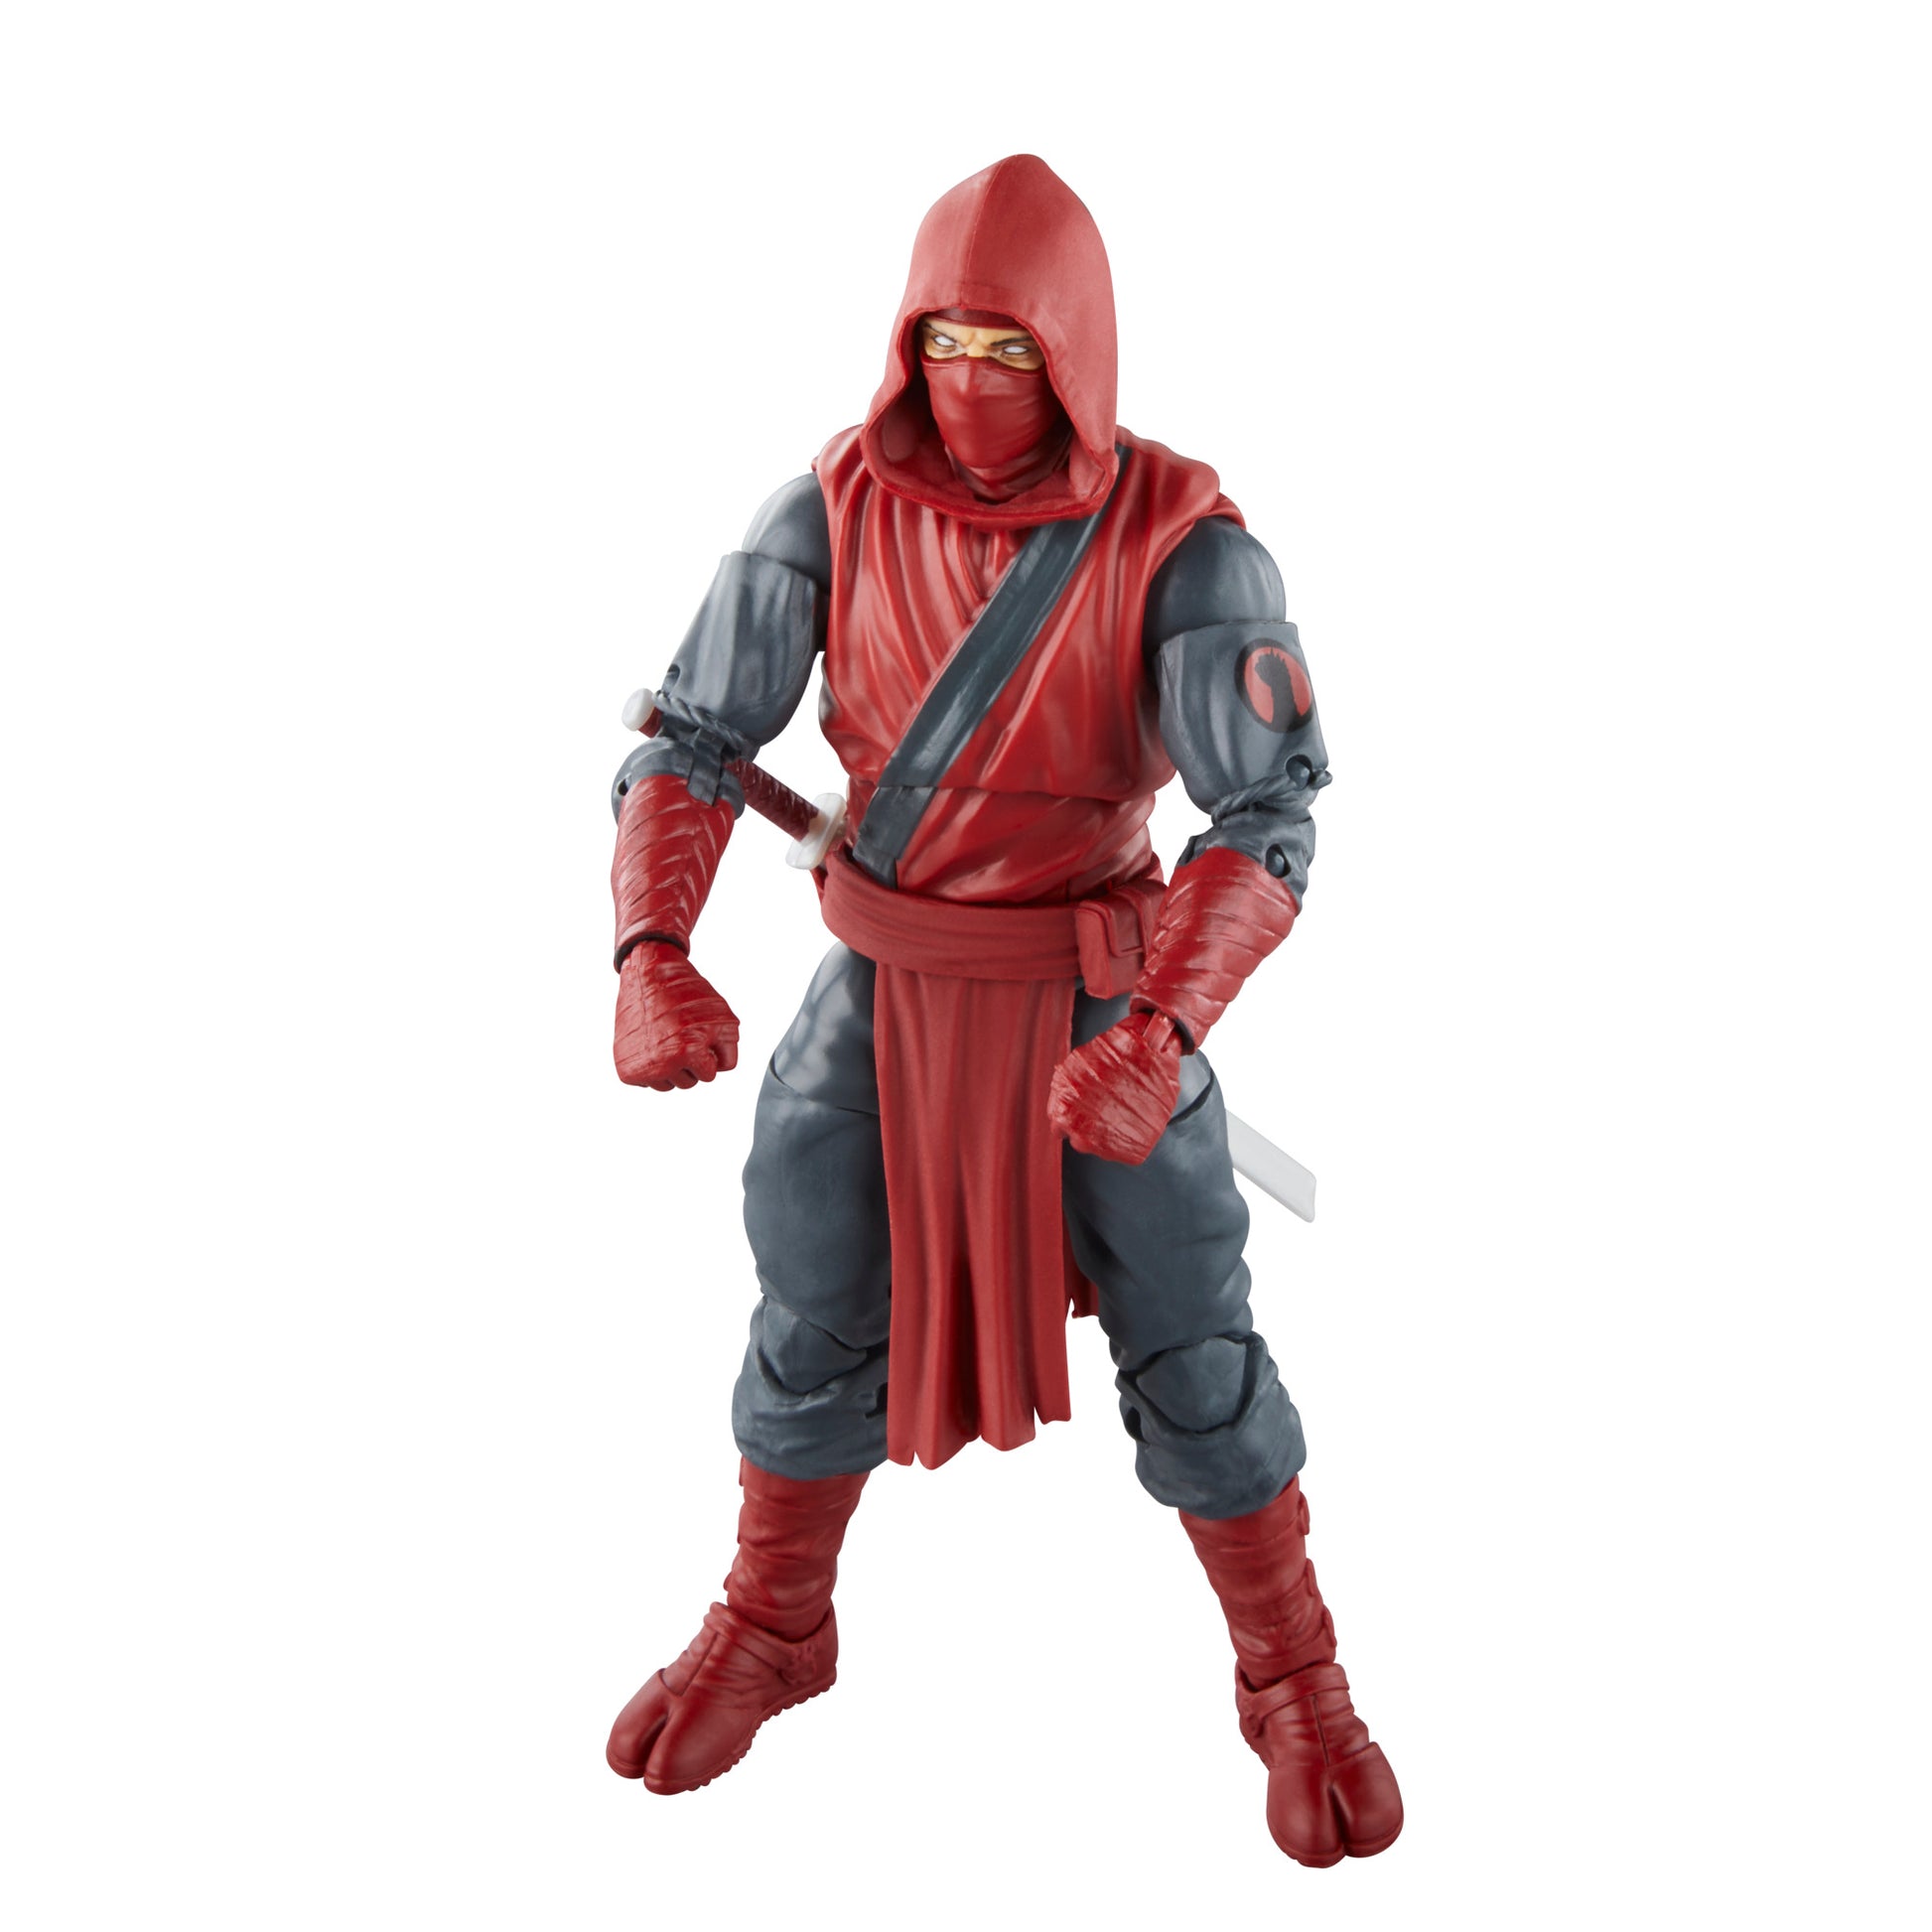 Hasbro Marvel Legends Series The Fist Ninja Action Figure Toy showing strength - Heretoserveyou